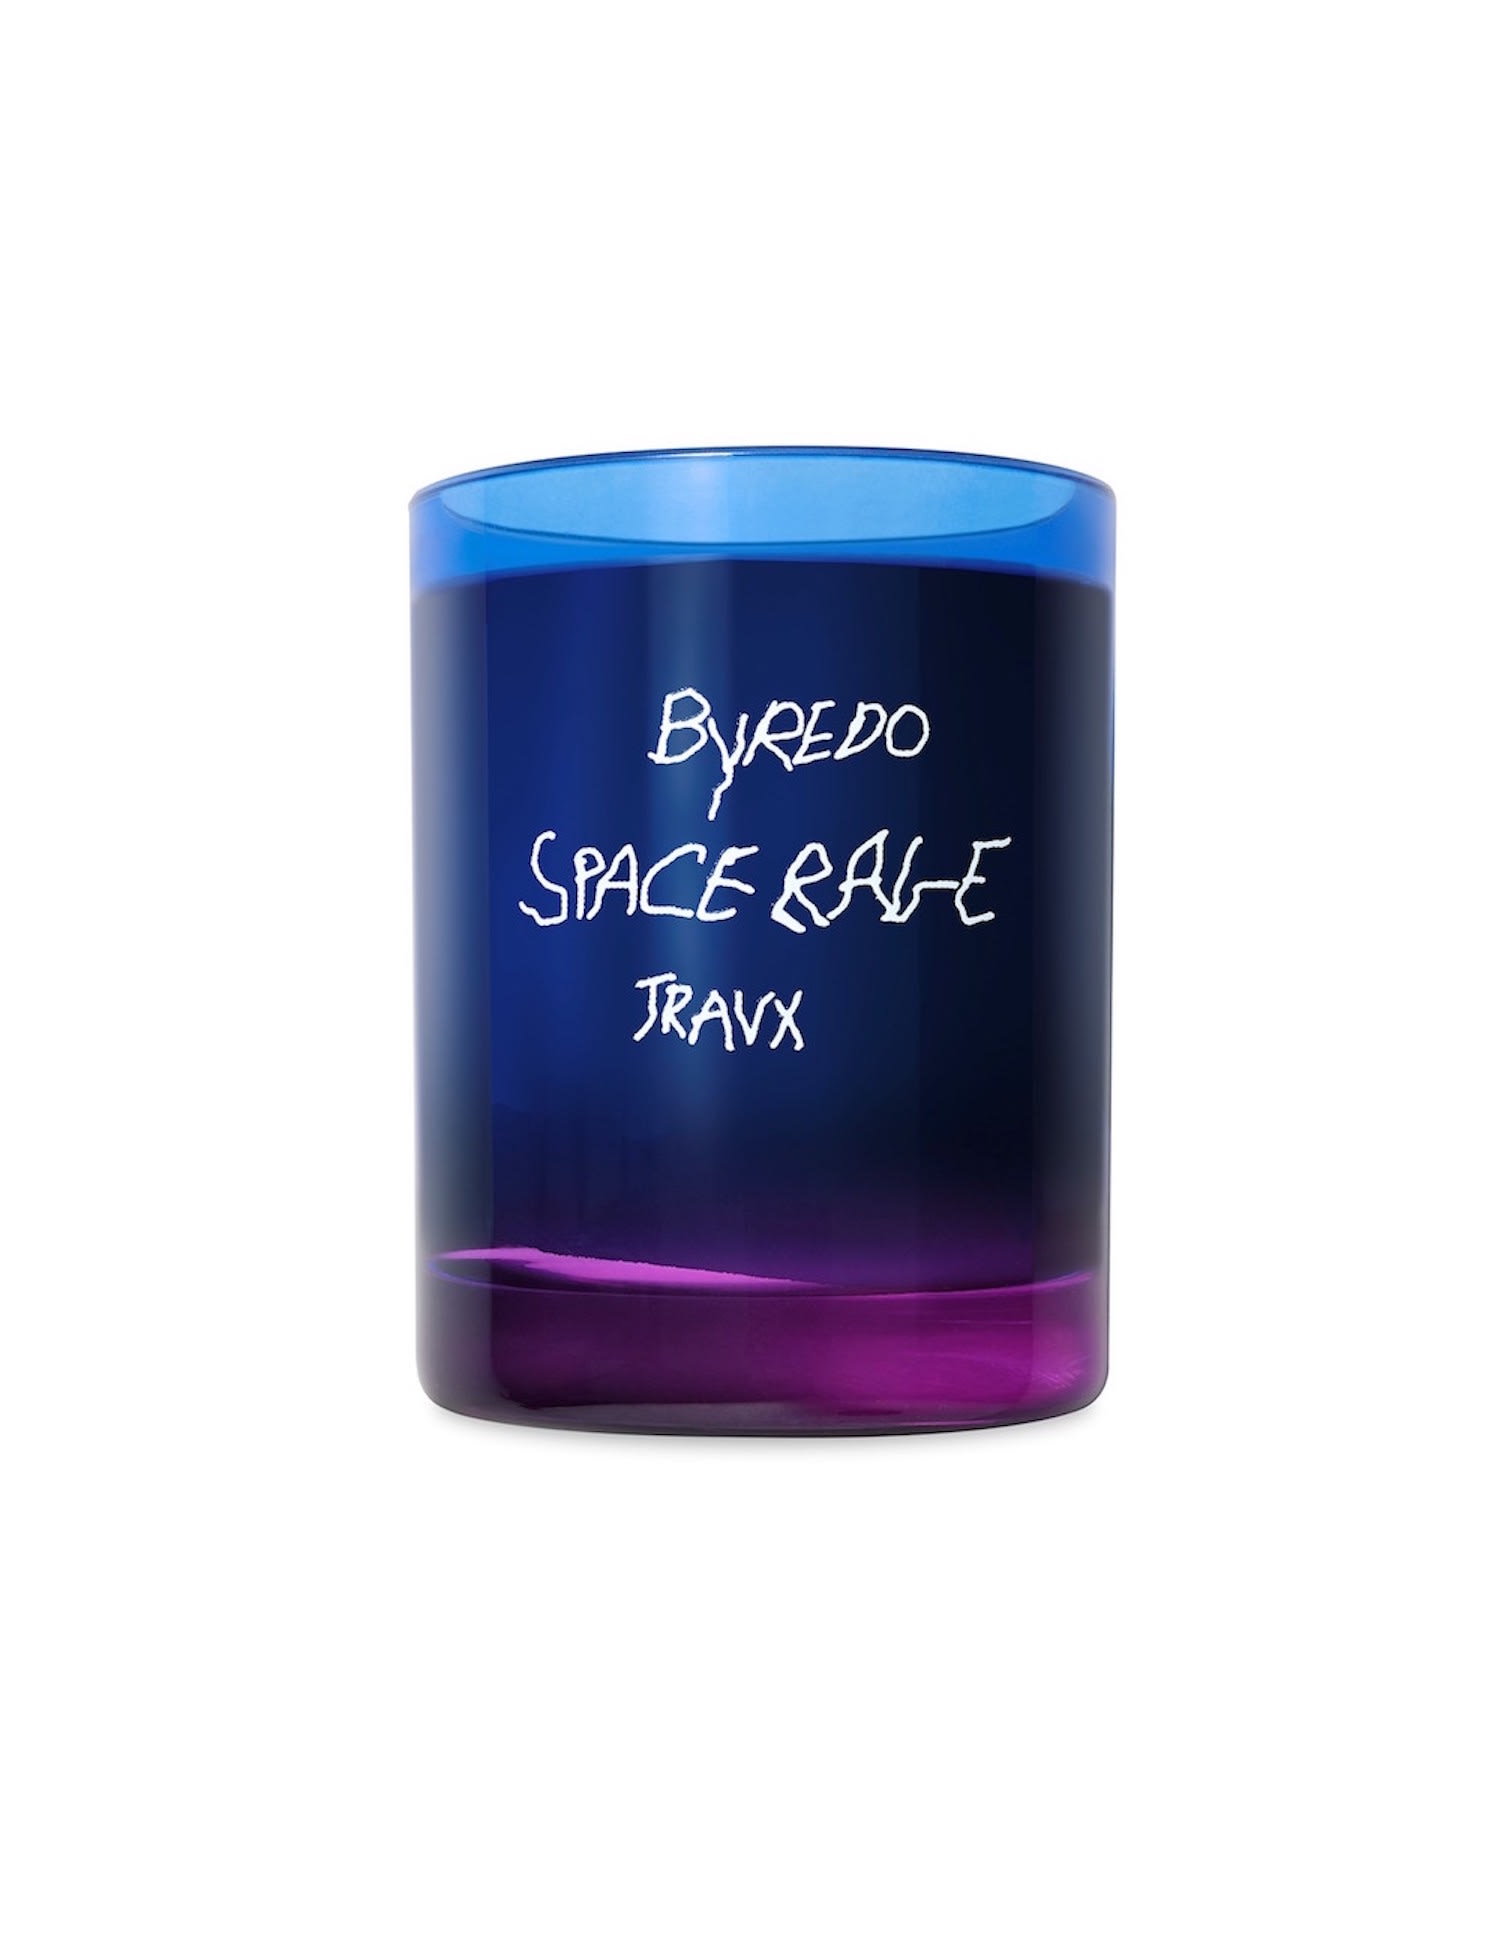 Image of Space Rage Candle.